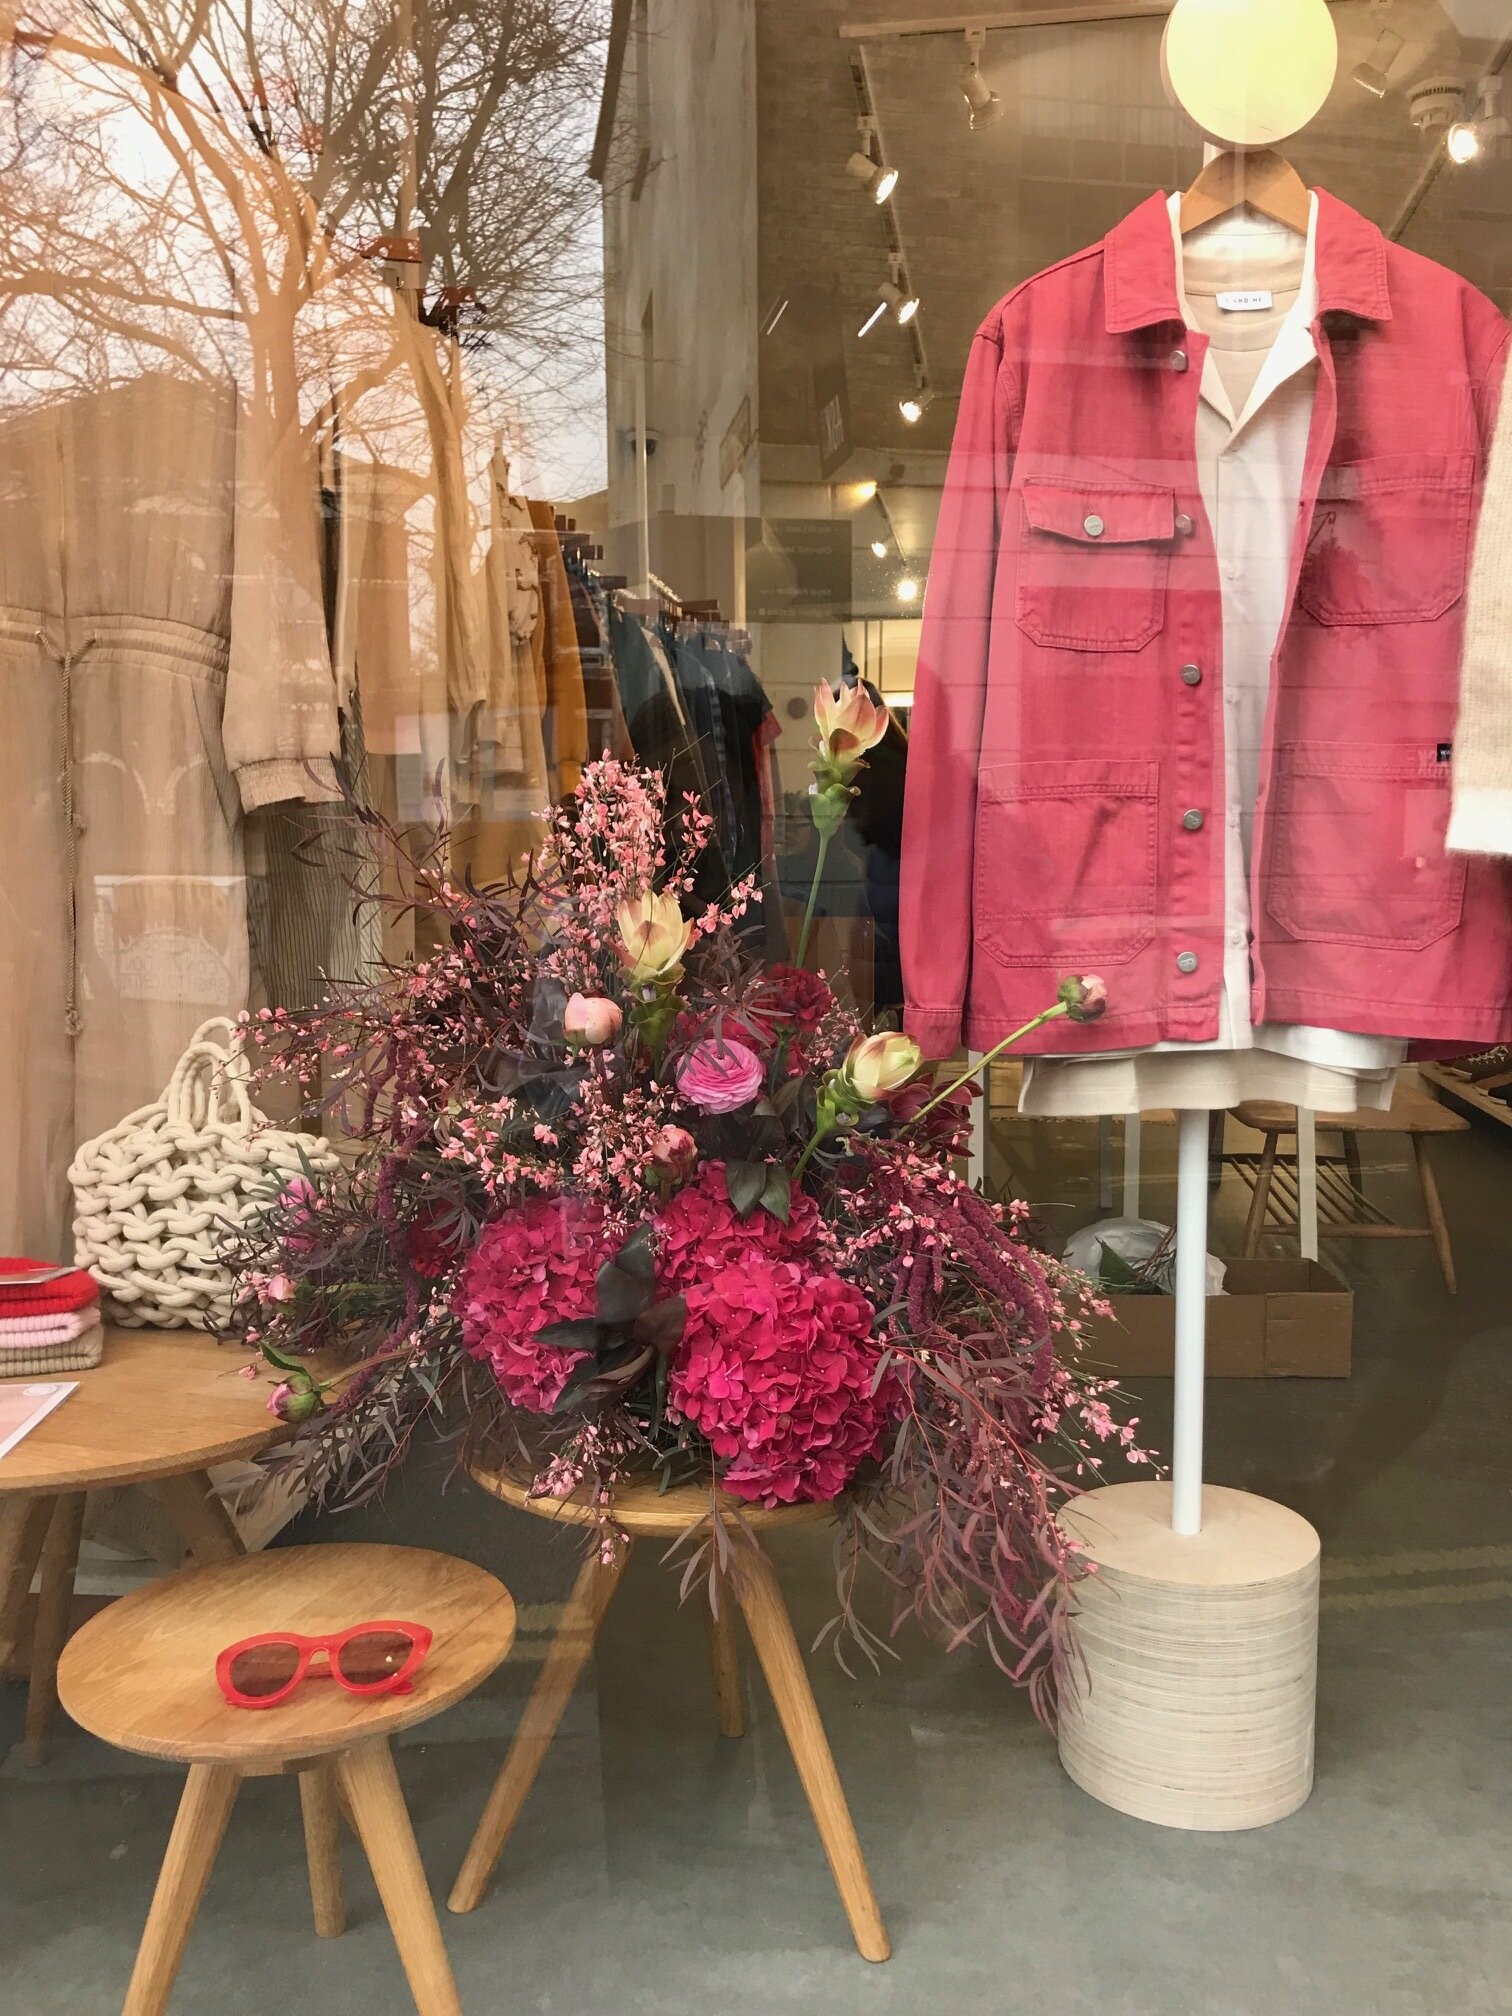   OUR DAILY EDIT, BRIGHTON   VALENTINES DAY WINDOW DISPLAY 